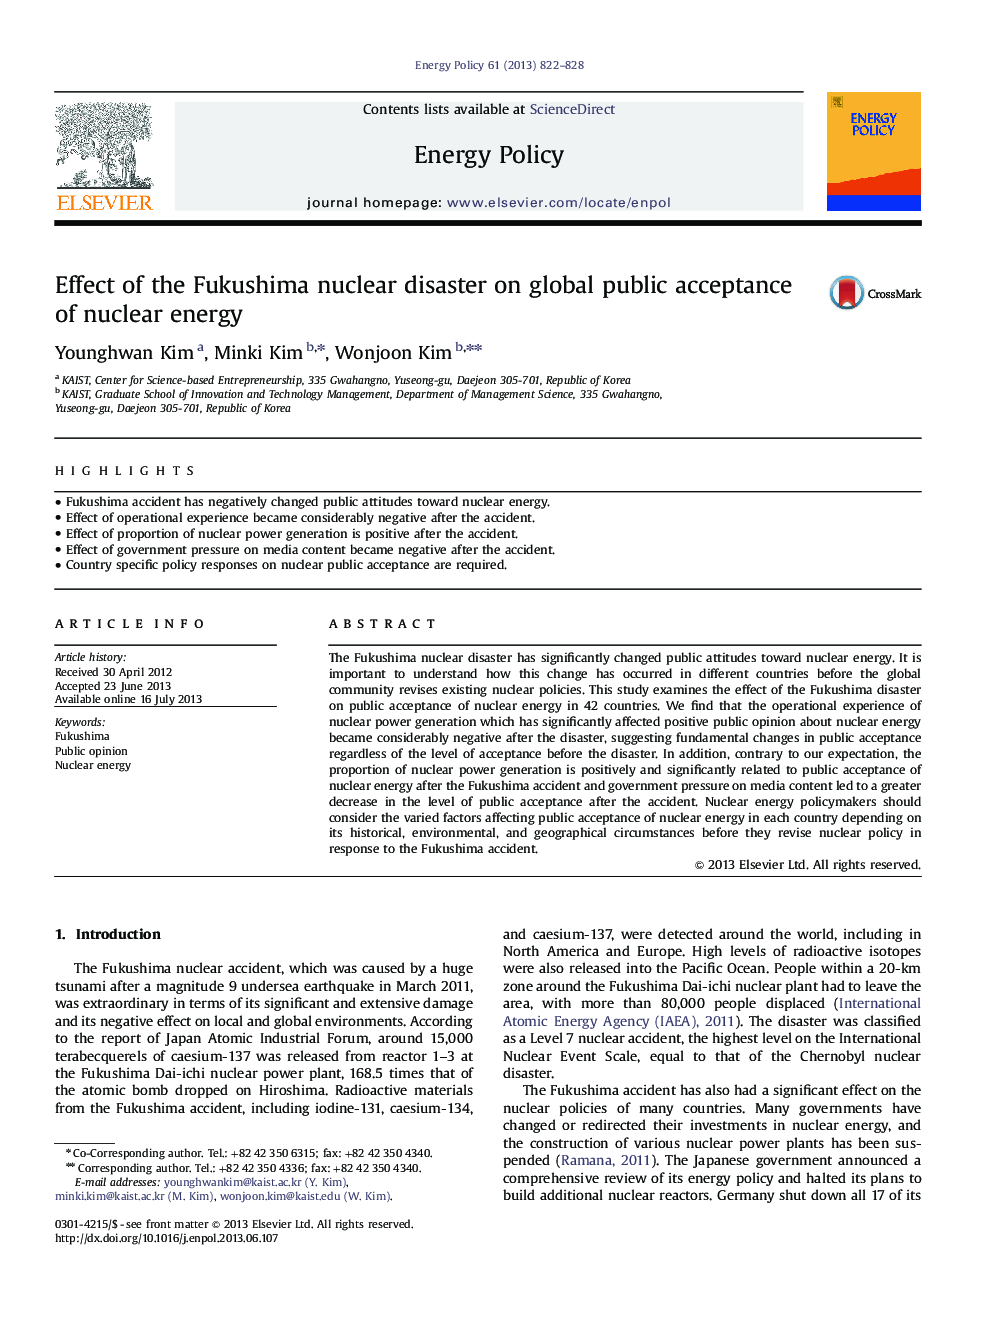 Effect of the Fukushima nuclear disaster on global public acceptance of nuclear energy